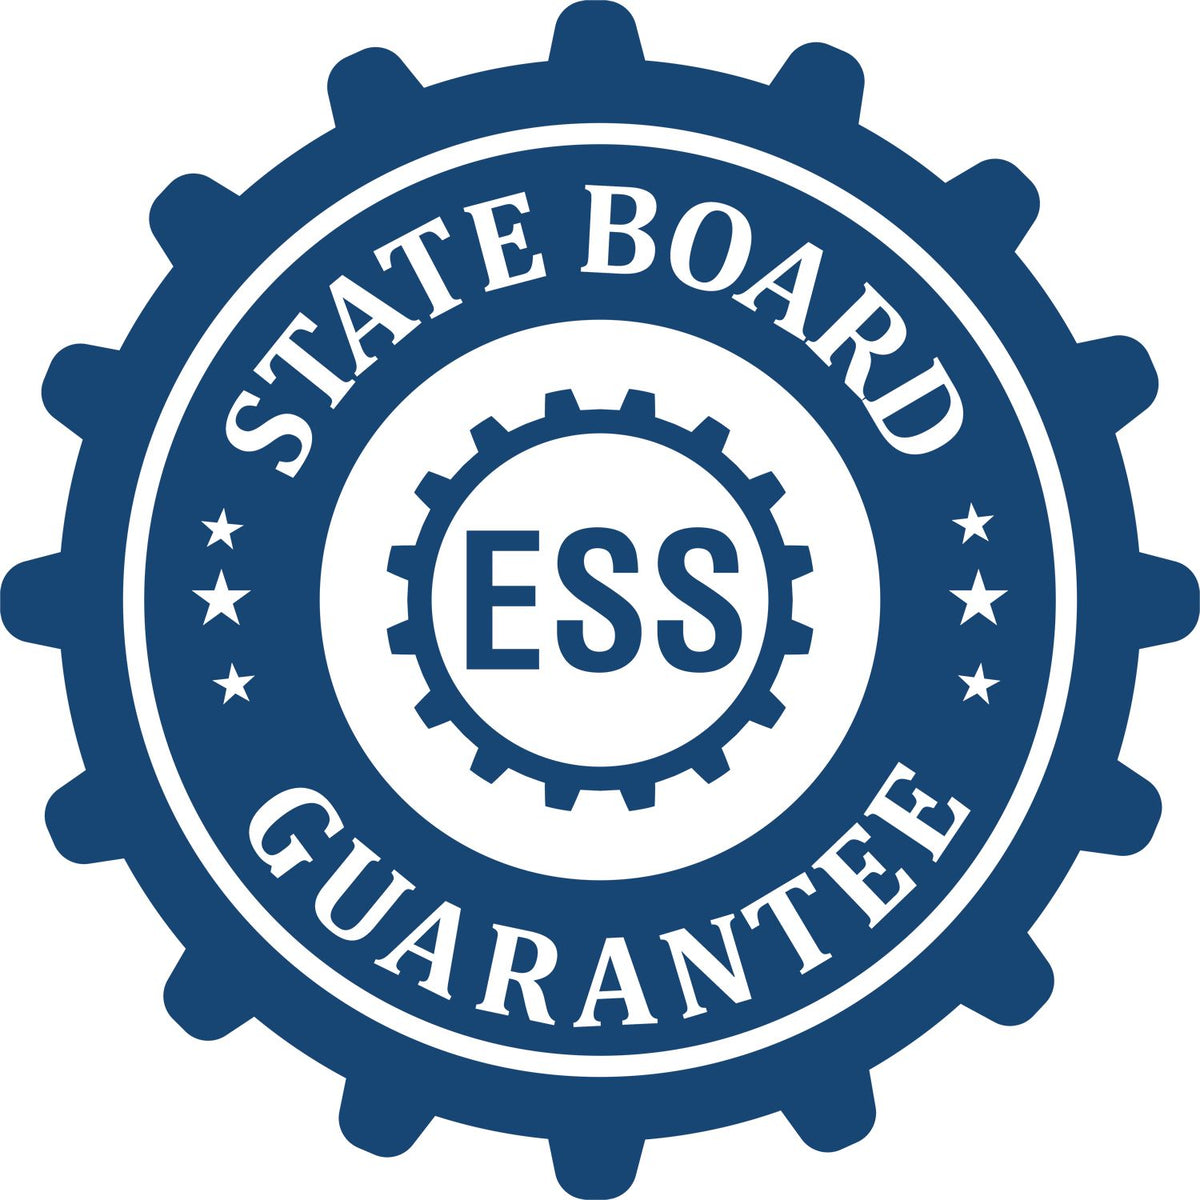 An emblem in a gear shape illustrating a state board guarantee for the Hybrid Iowa Landscape Architect Seal